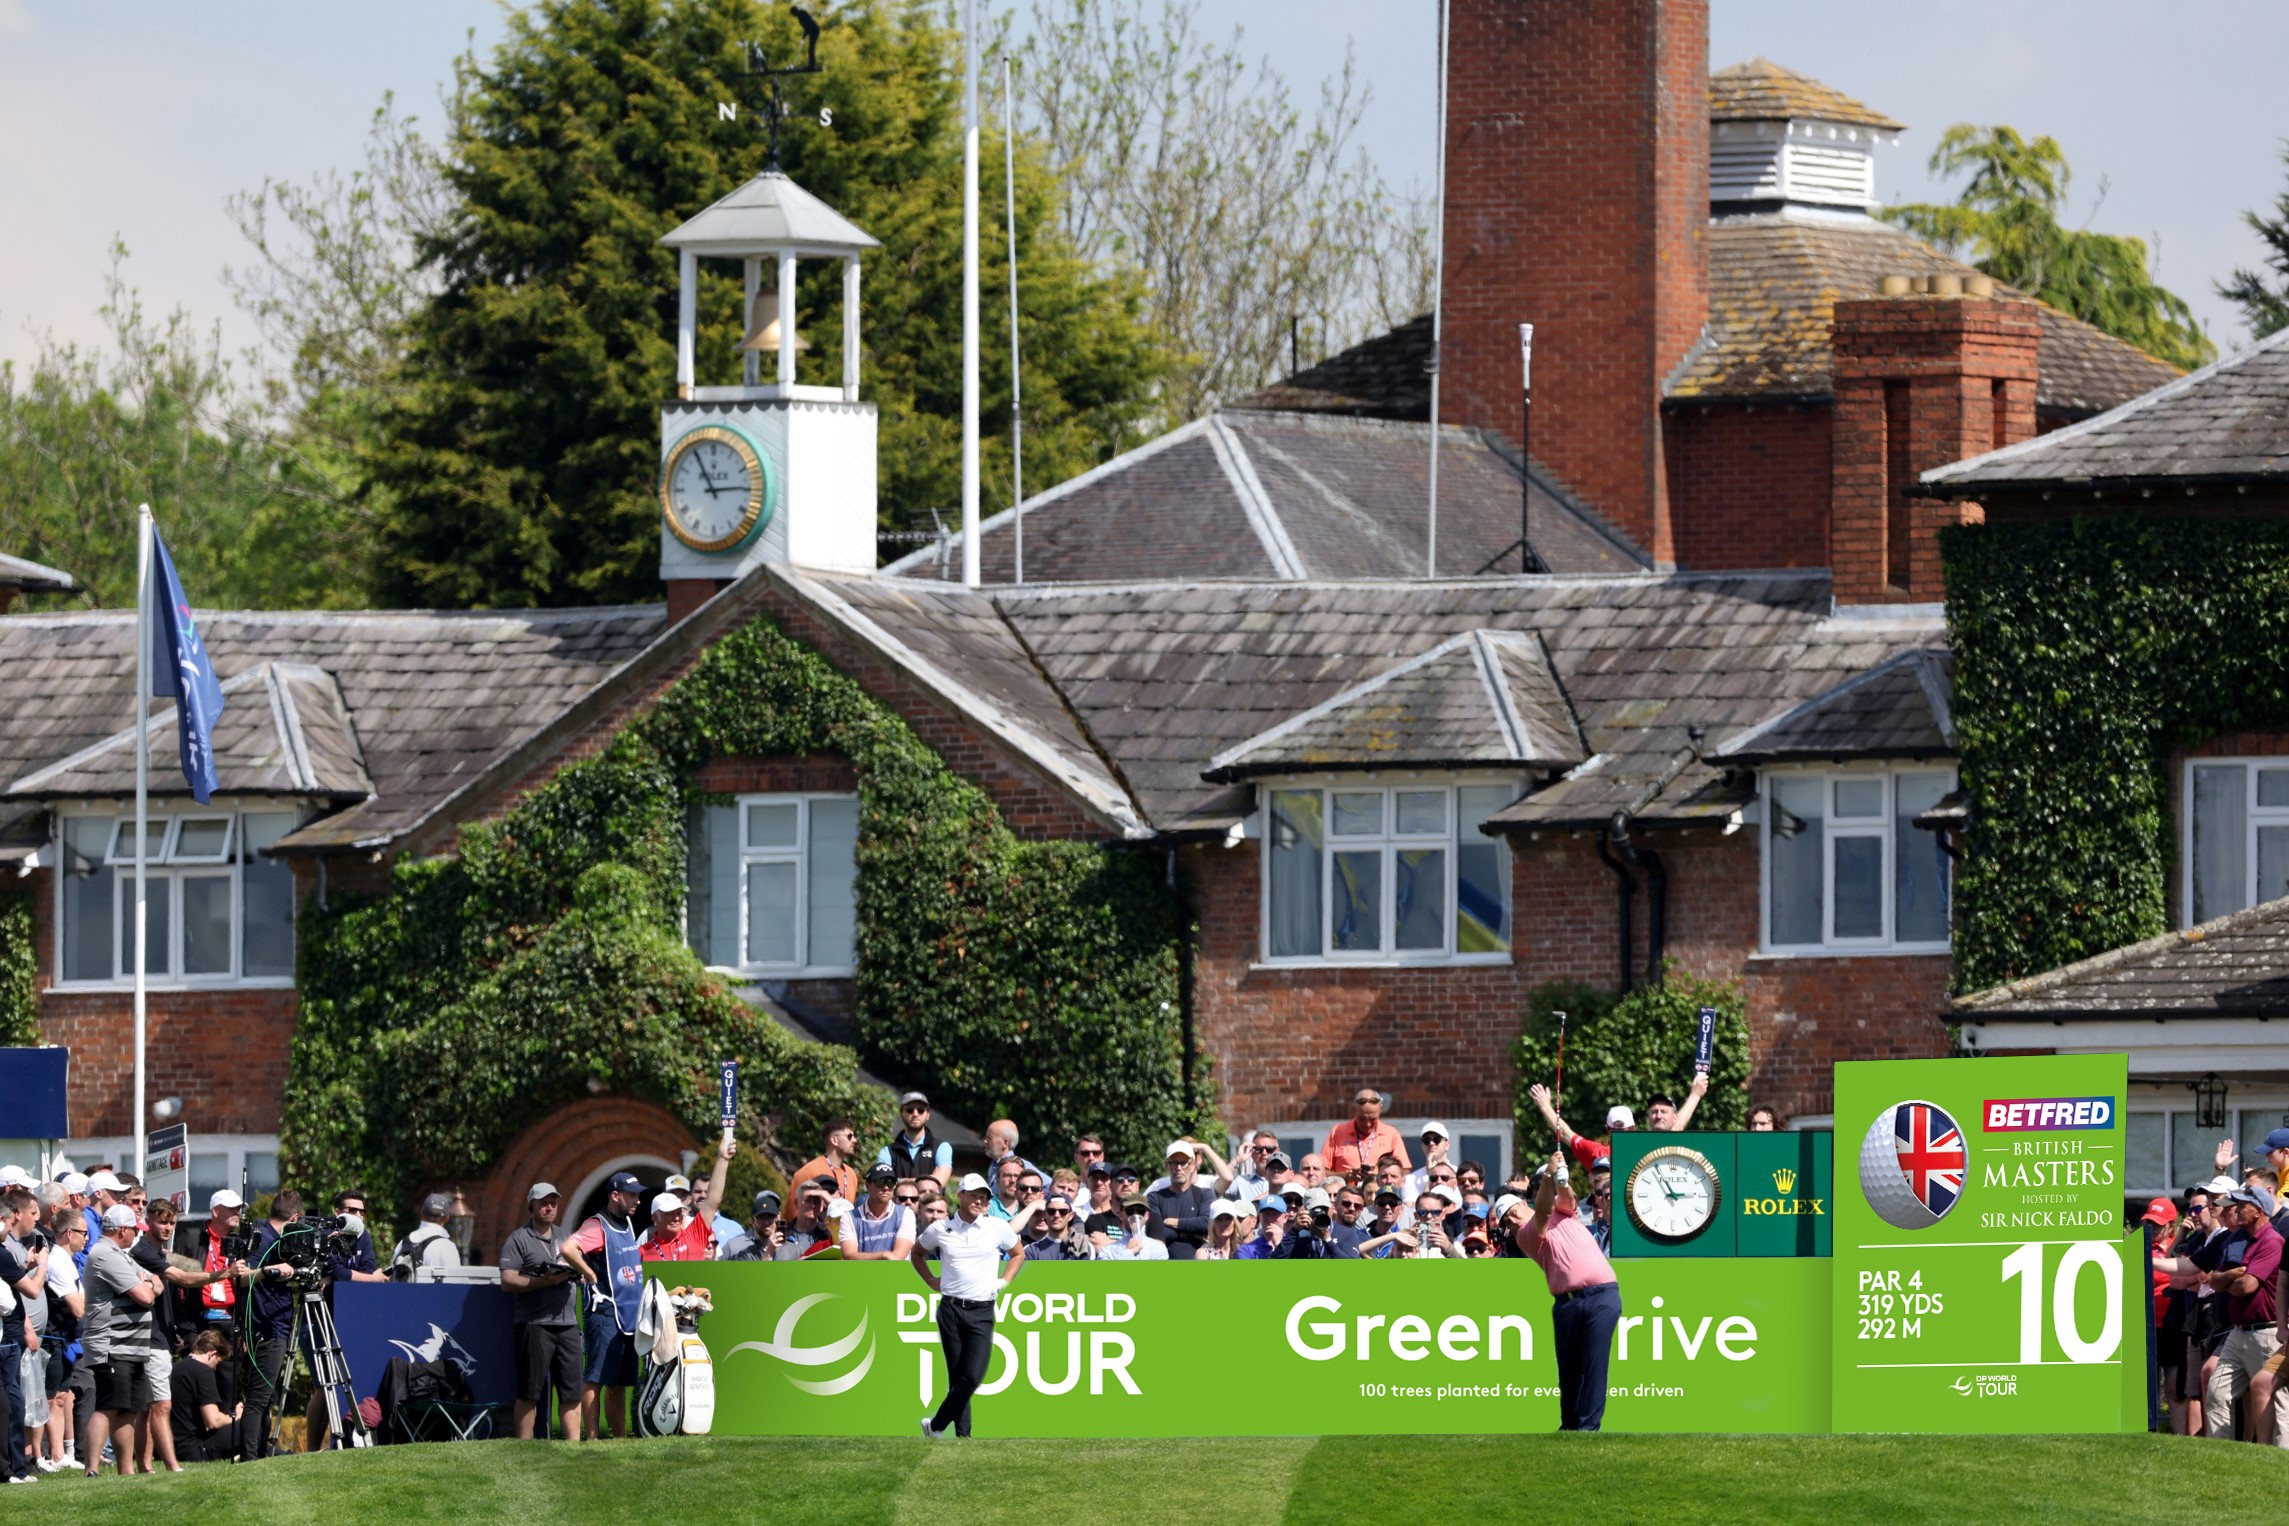 Image for DP World Tour launches New Green Drive Tree Planting Campaign At The Betfred British Masters